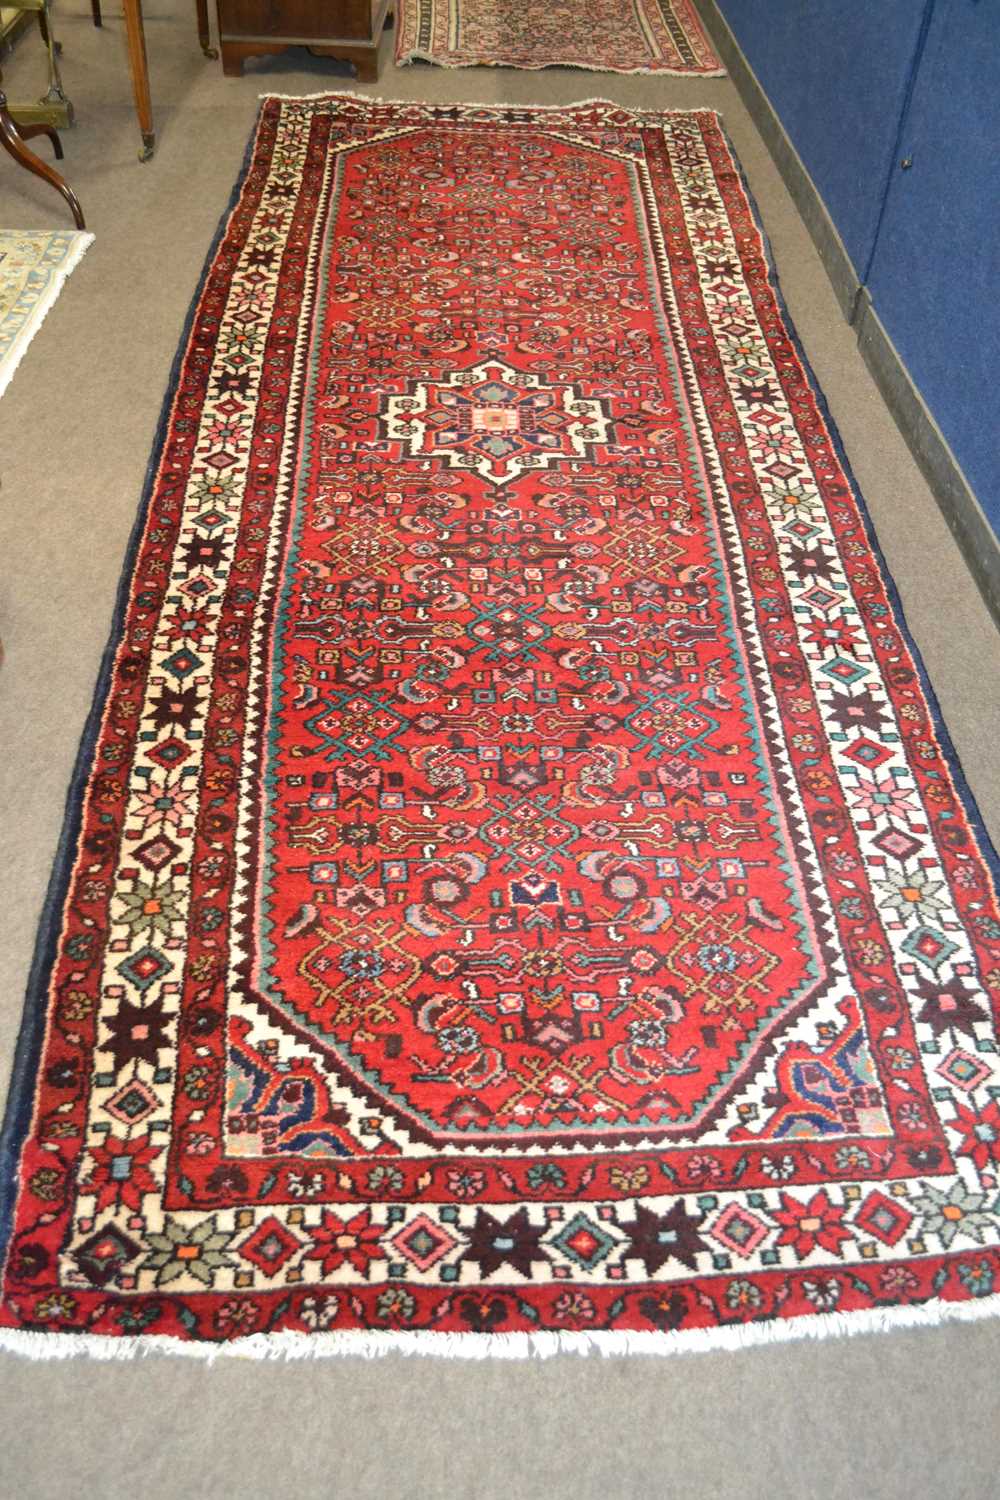 A Turkish wool runner carpet with large central medallion surroumded by a close geometric pattern on